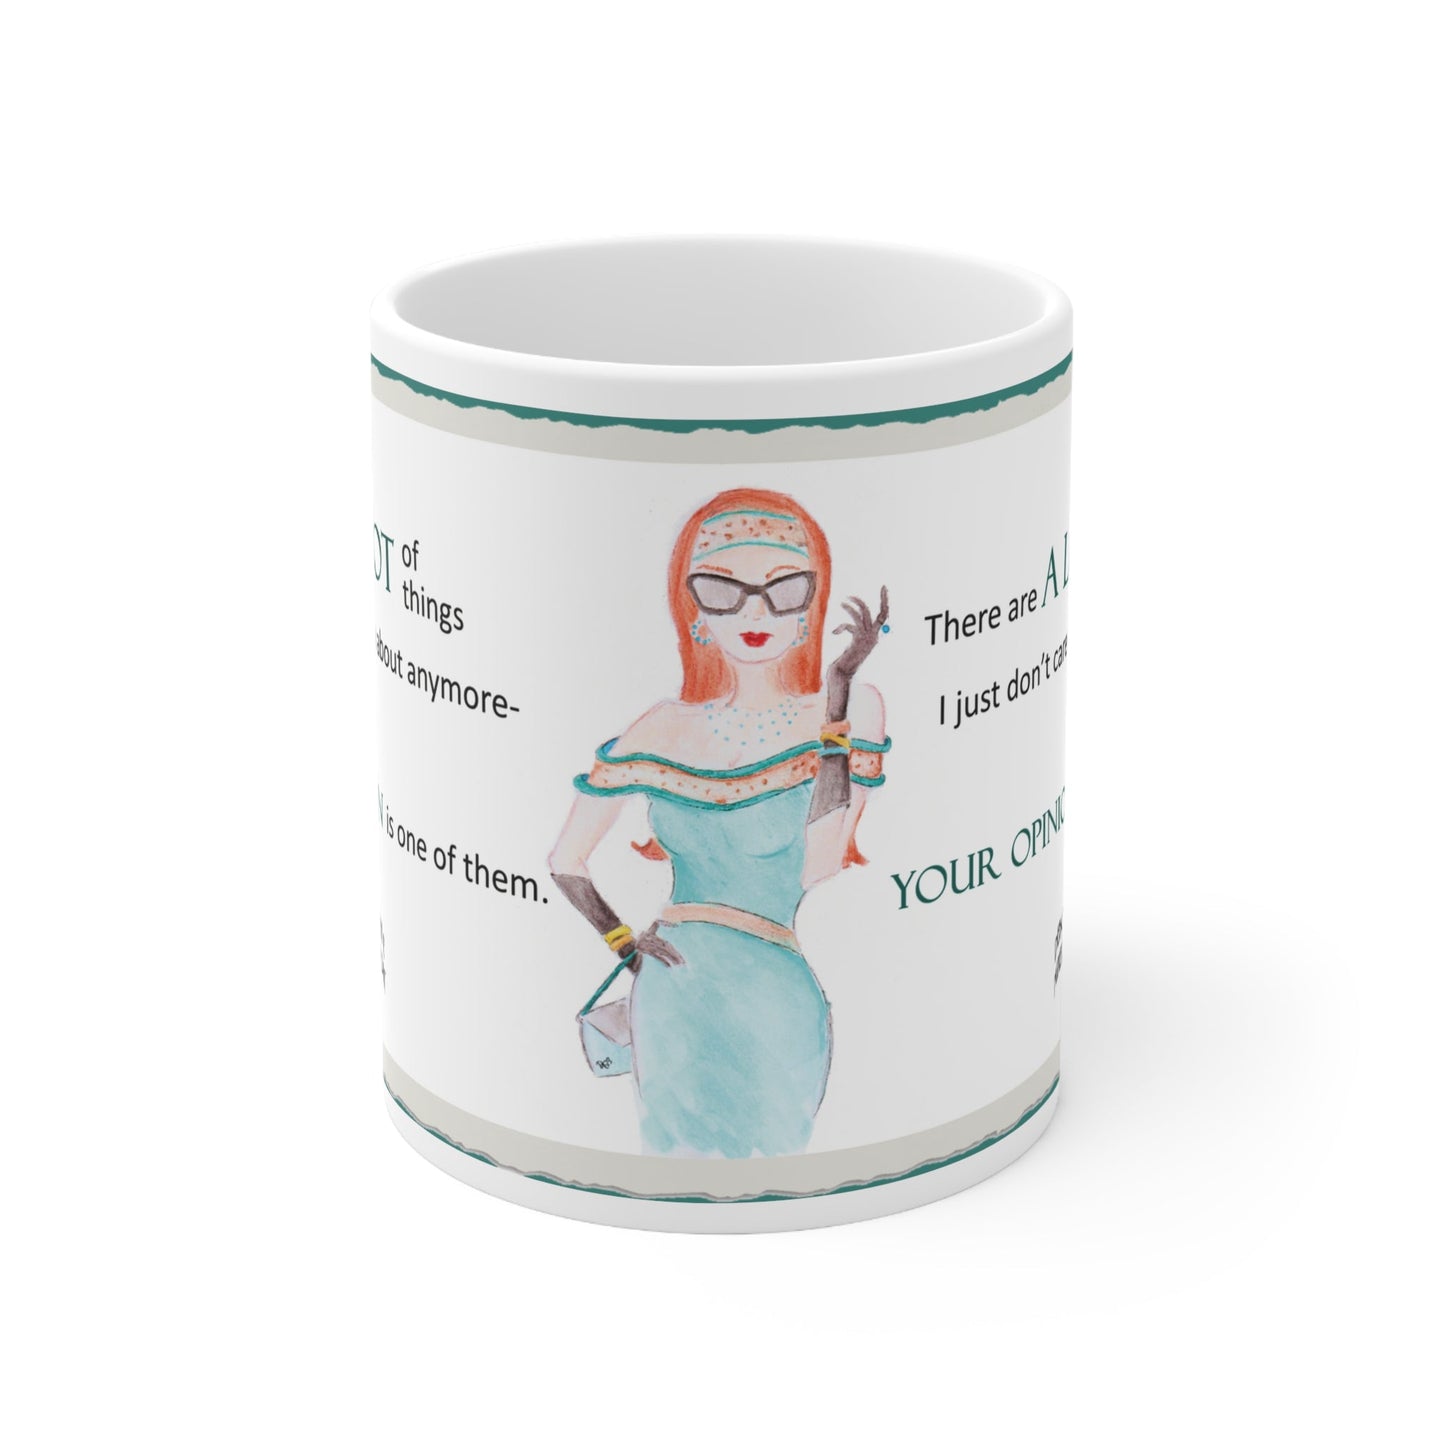 "A Lot Of Things I Don't Care About" 11oz Mug